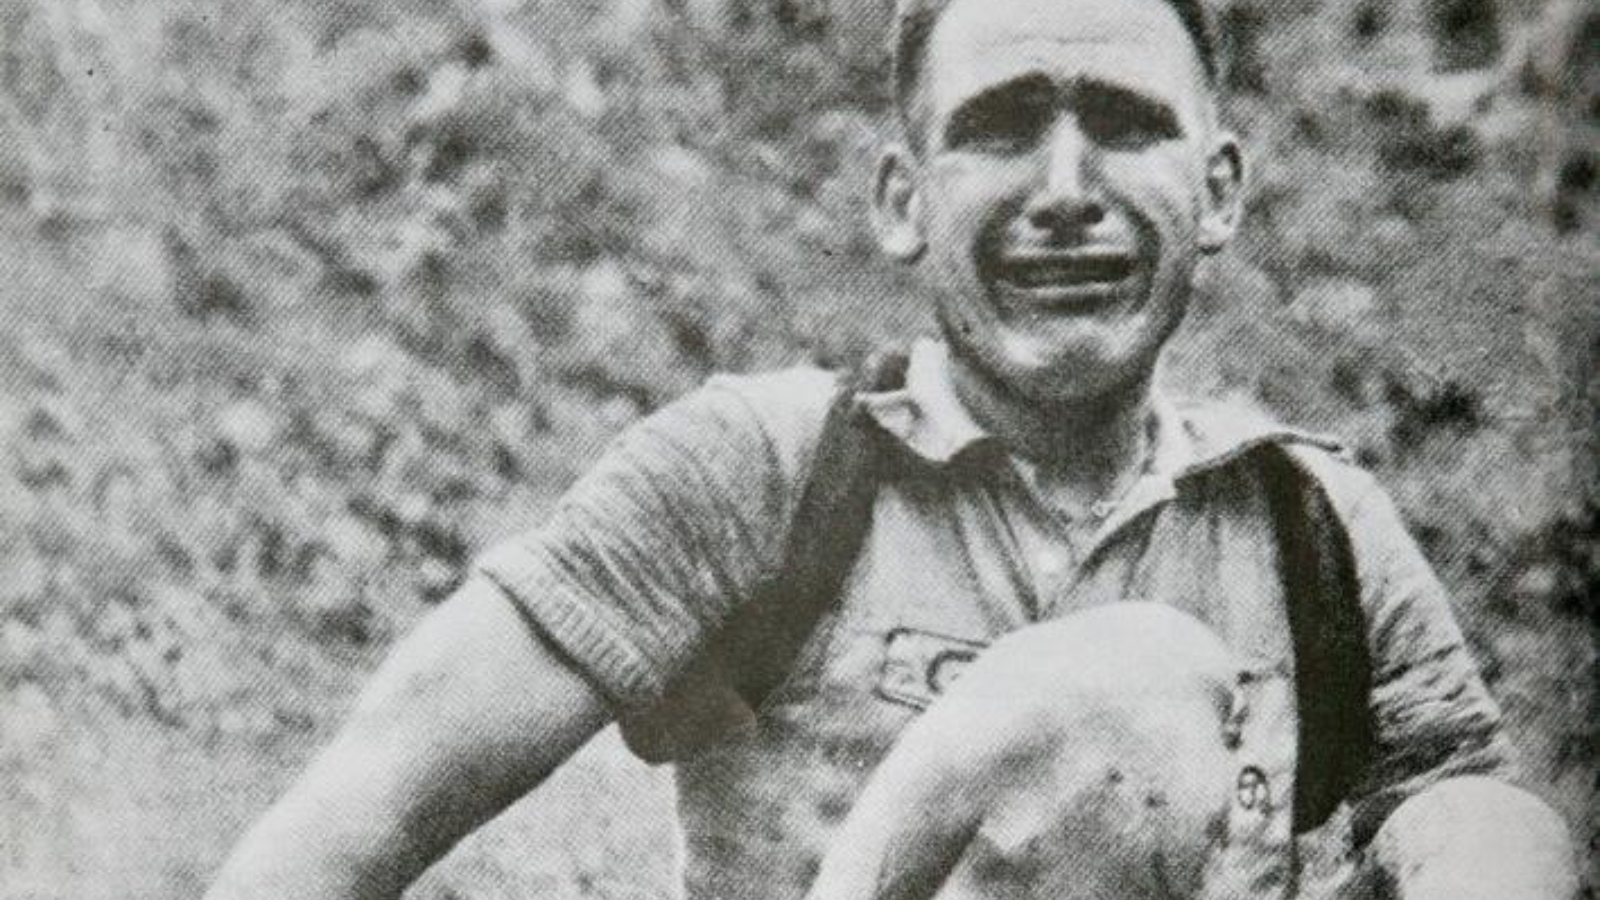 Wim van Est after he fell into a 70 meter deep ravine in the 13th stage of Tour de France 1951